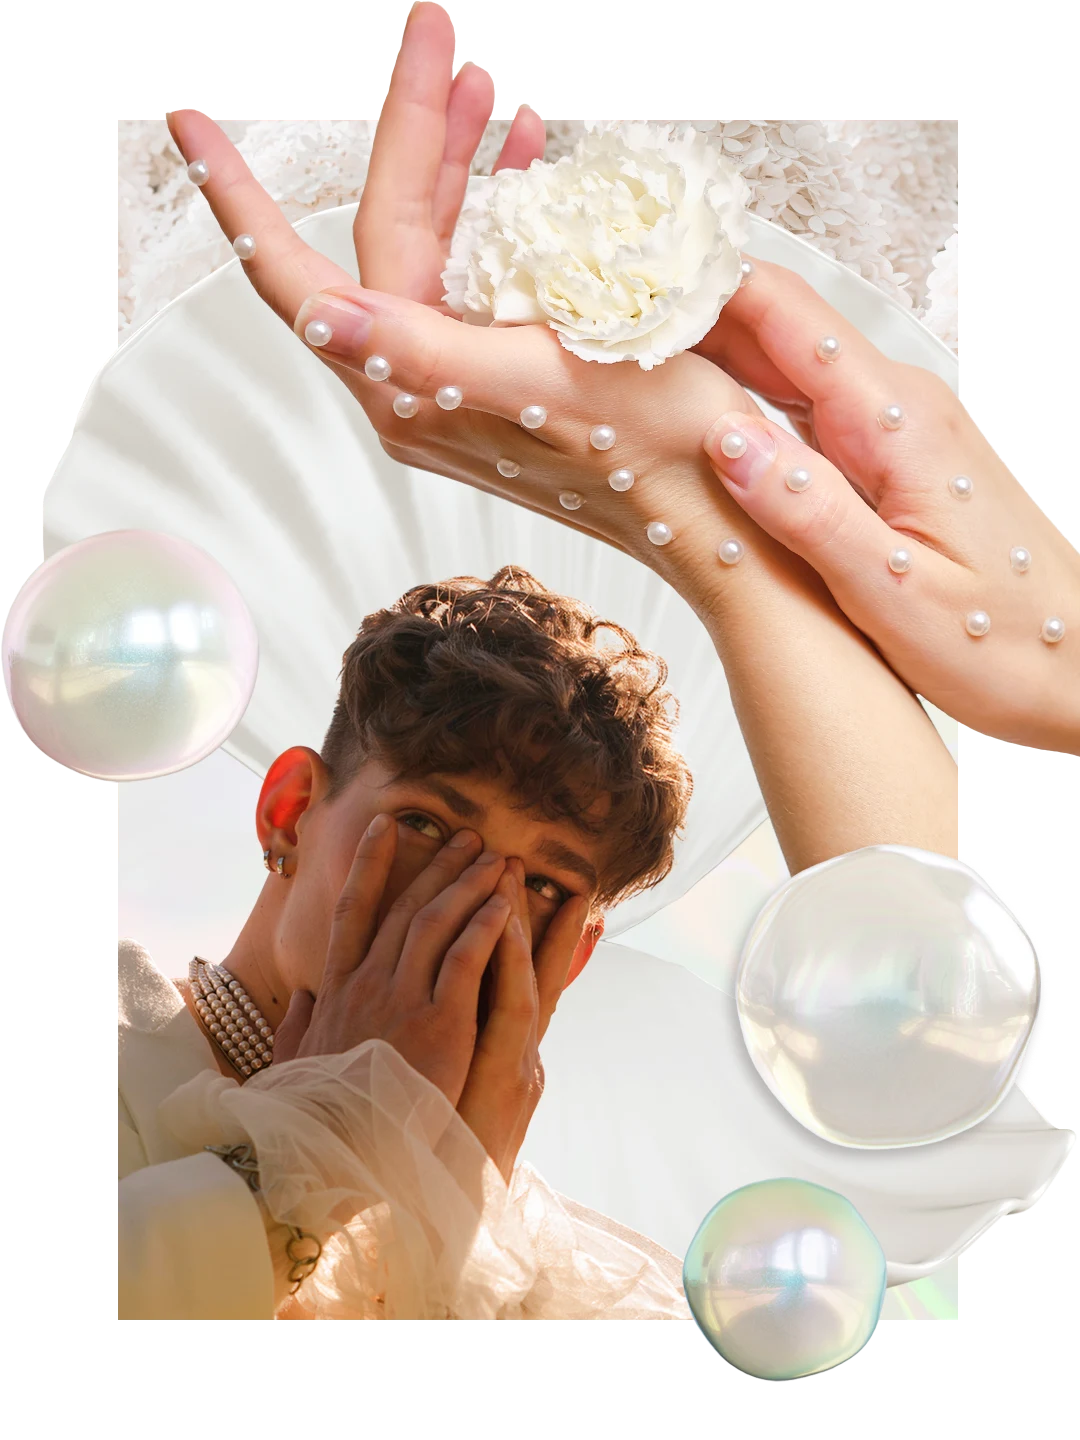 Collage of pearl-themed items. White man wearing a pearl choker necklace, holding his hands to his face. A hand with pearls holding a white carnation. A white clam shell in the background. 
